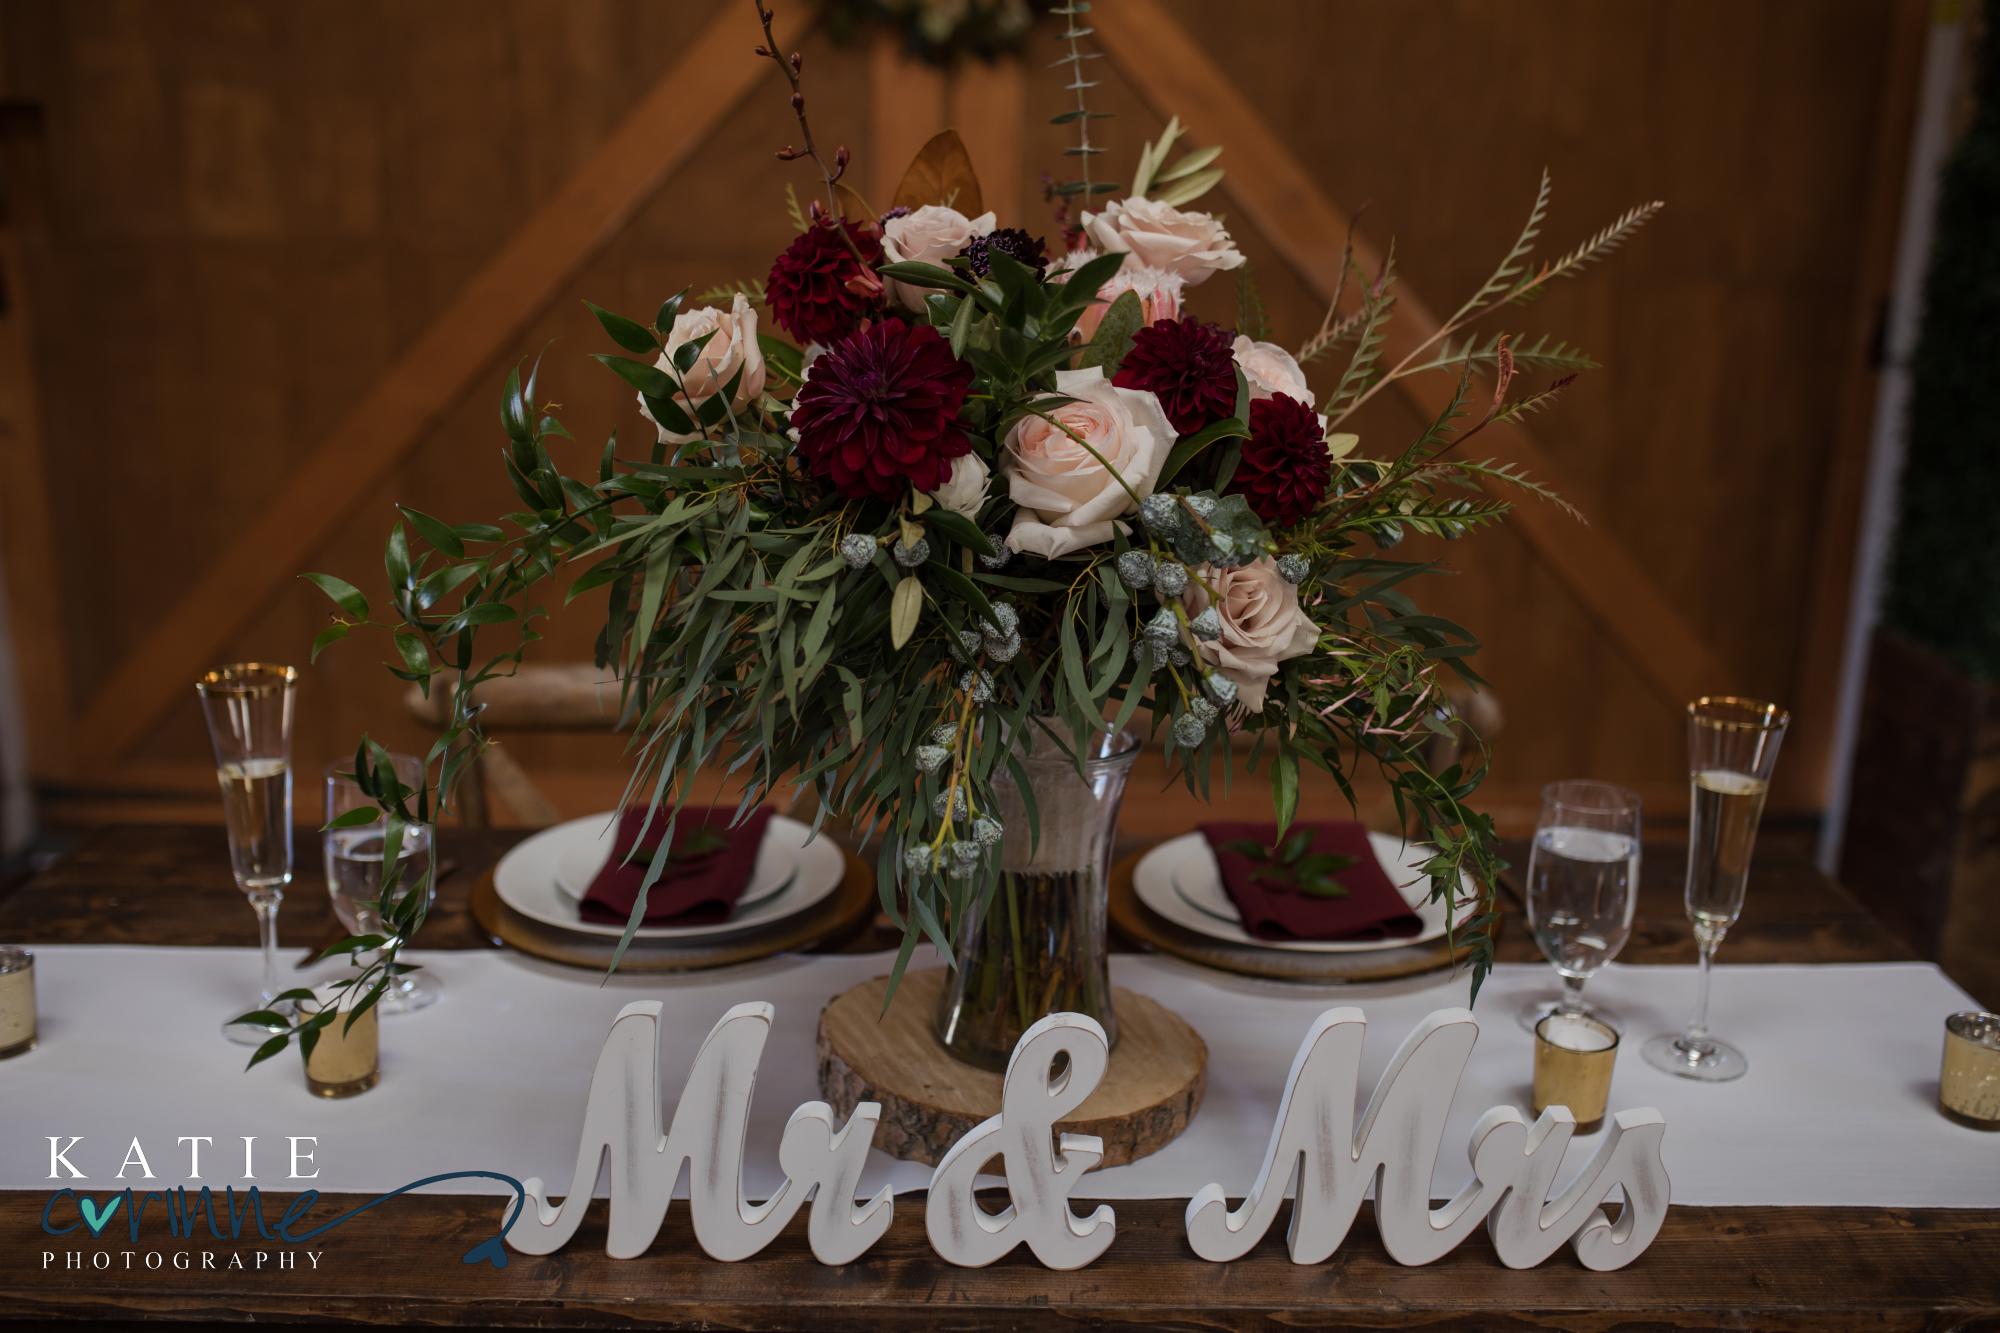 Mr and Mrs signs on newlywed table